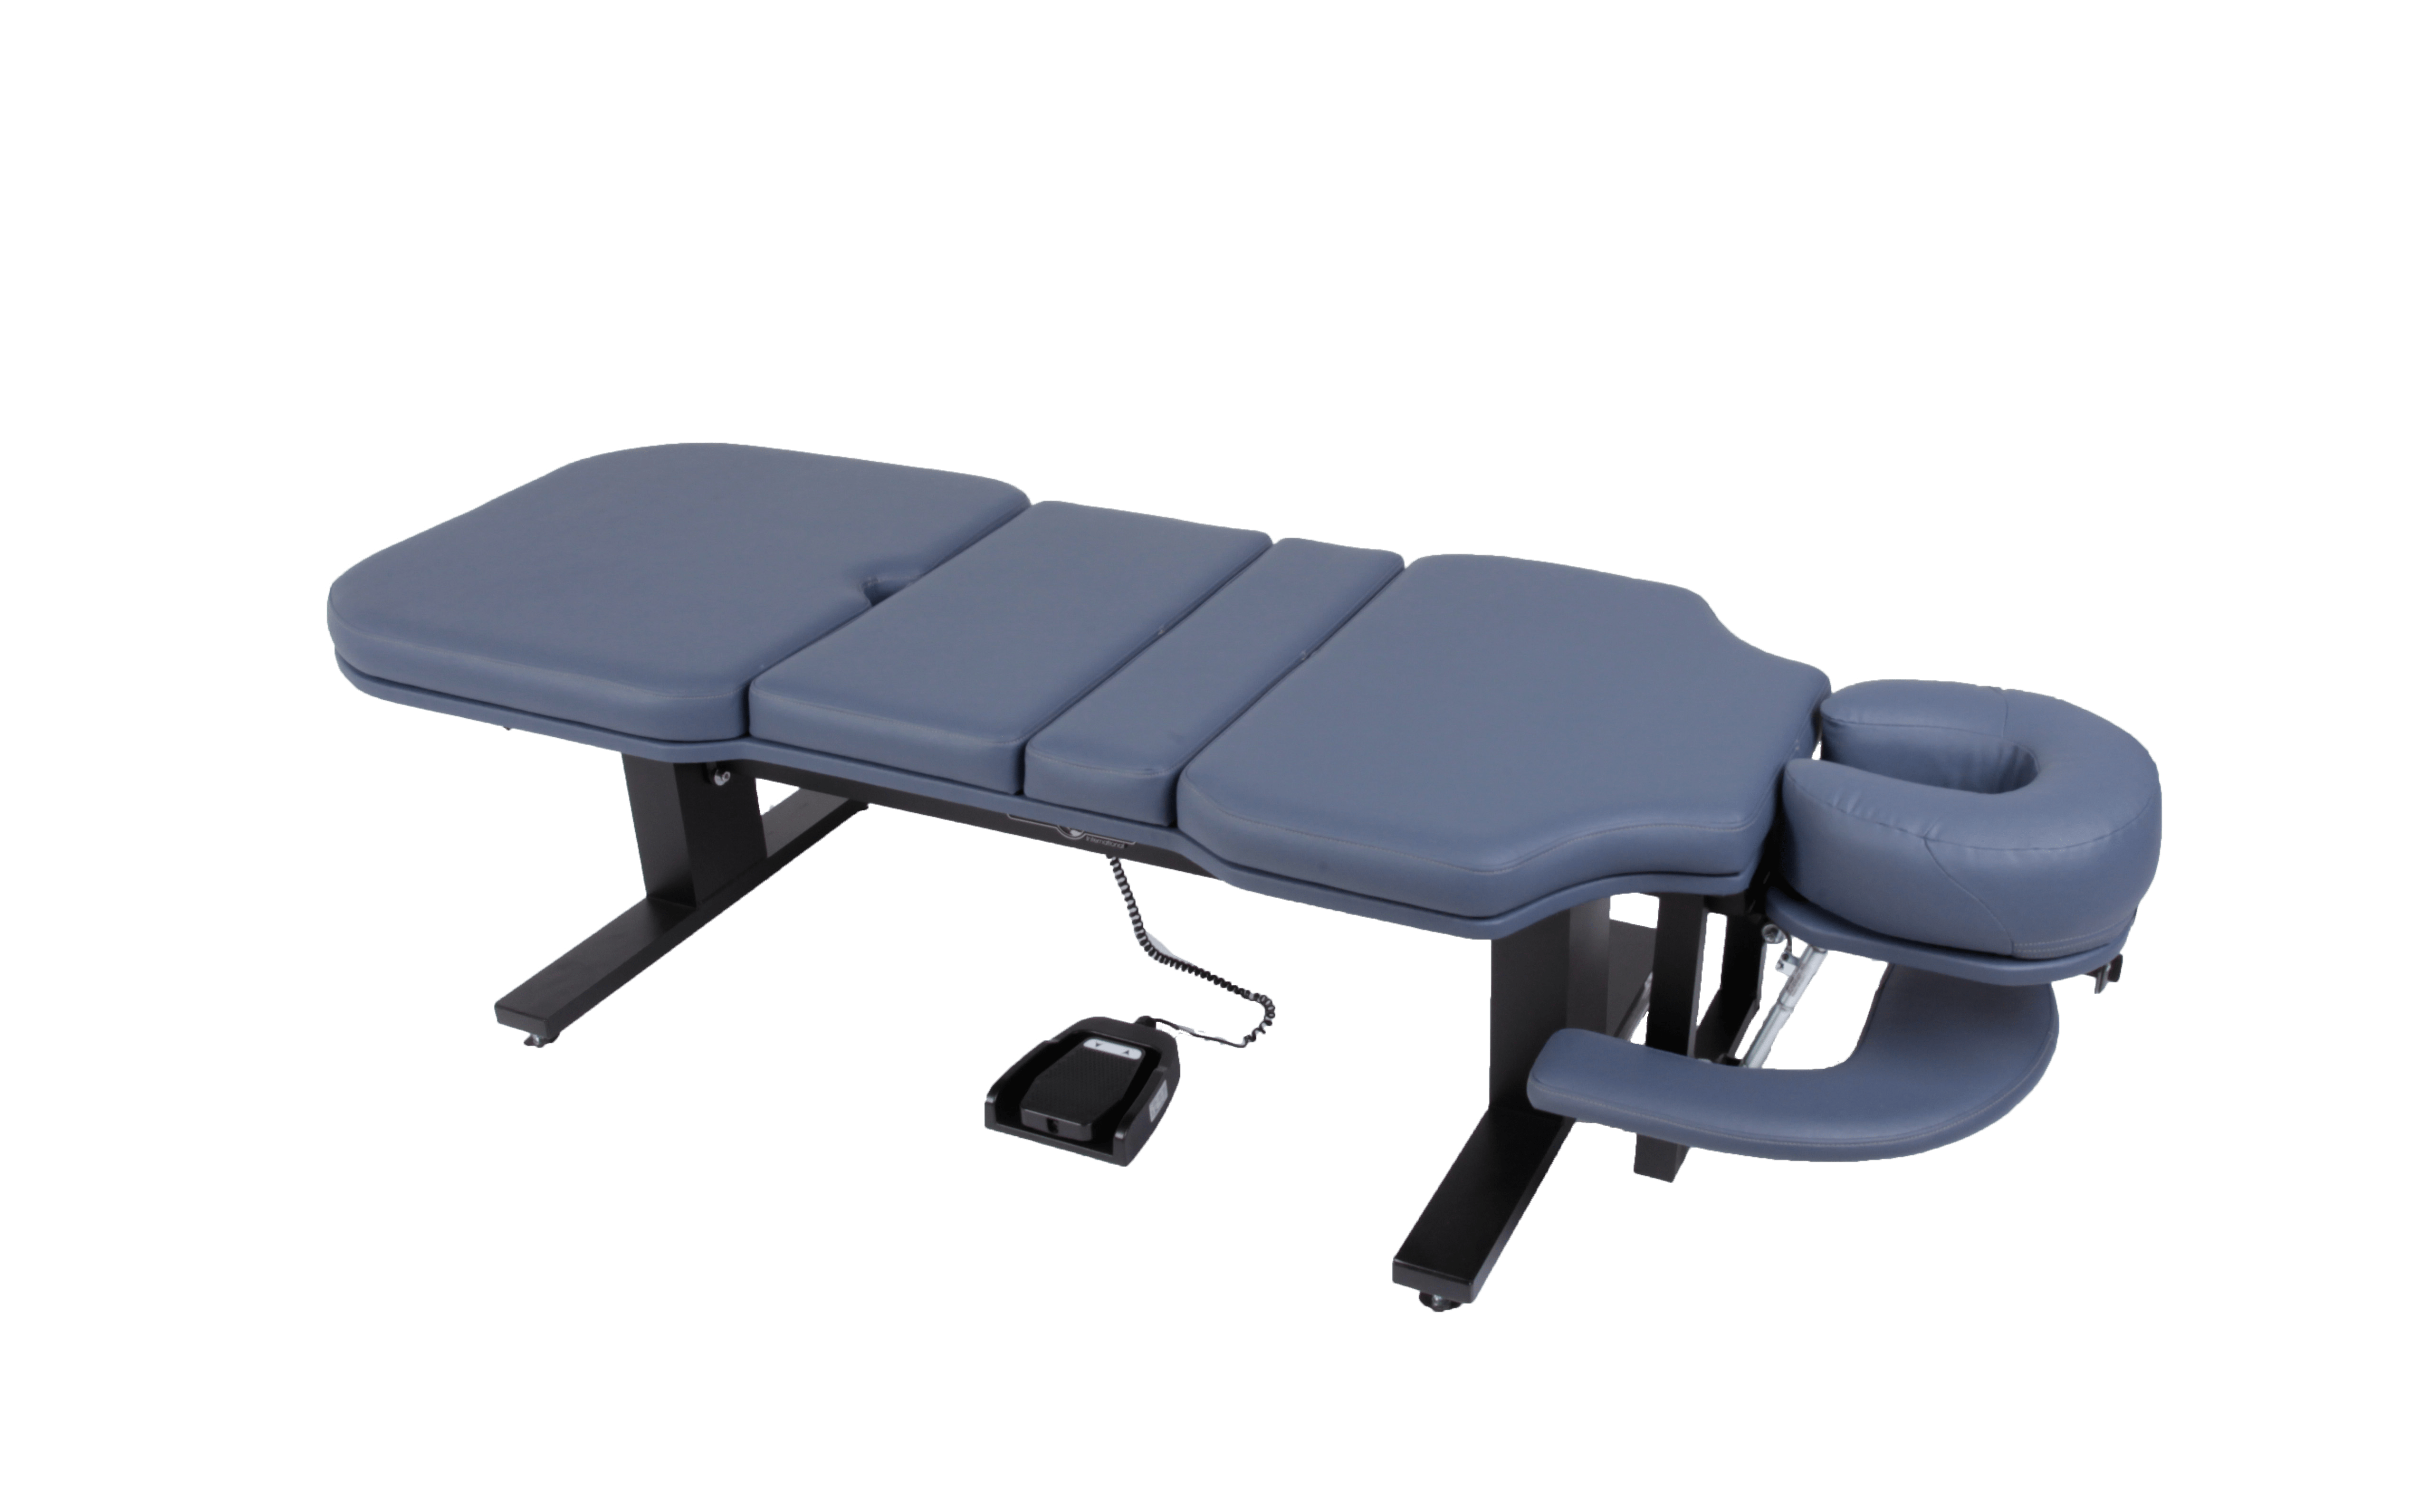 Blue Lifetimer International LT-CAM chiropractic adjustment drop and massage programmable elevation ergonomic treatment table with foot pedal